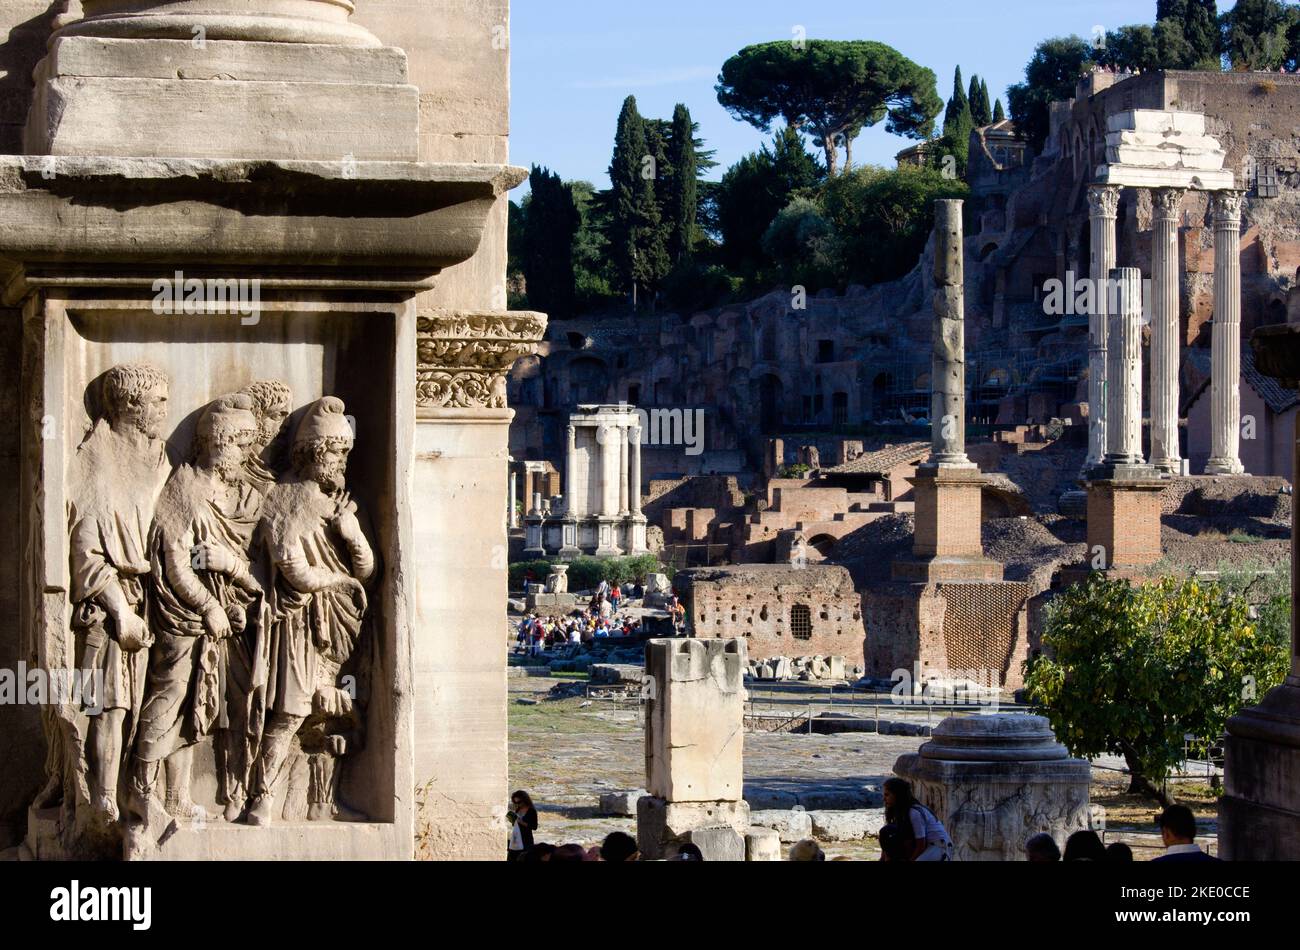 ITALY Lazio Rome The floor of the Forum with tourists. A detail of the Arch of Septimius Severus the Temple of Vesta and the three Corinthian columns of the Temple of Castor and Pollux in front of the Palatine hill Stock Photo